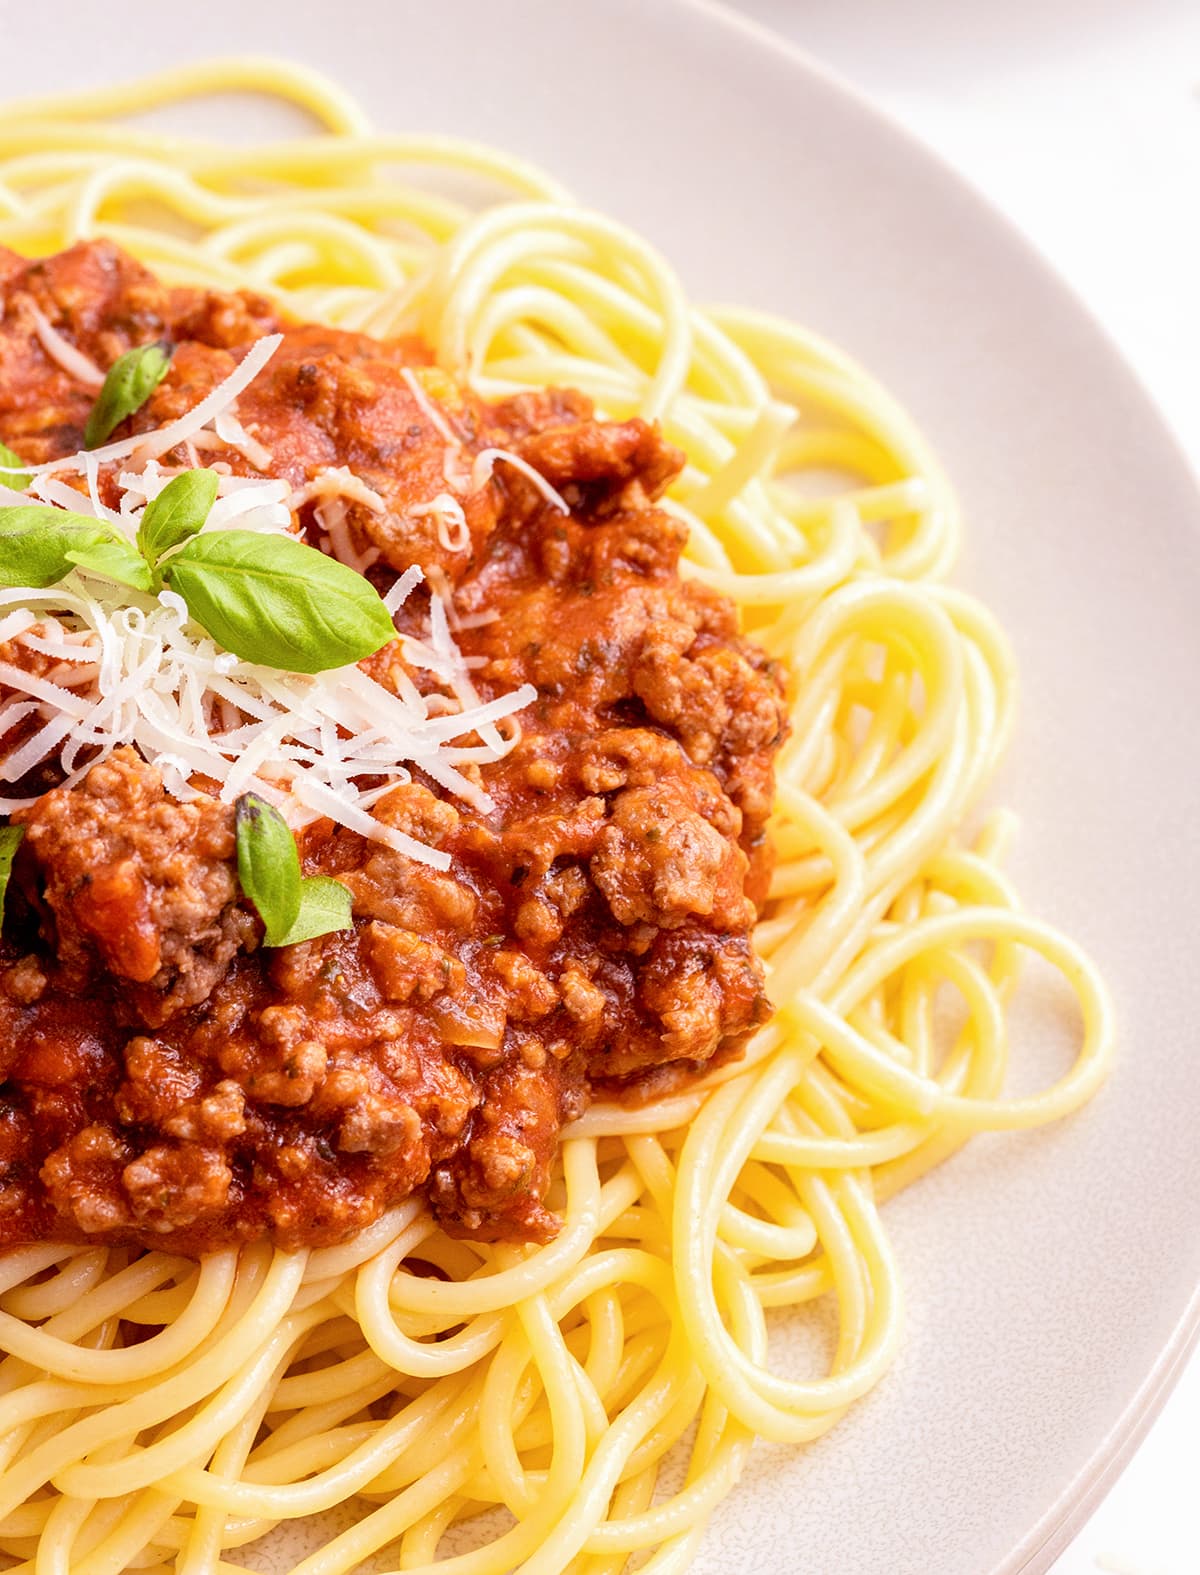 A close up of a plate of spaghetti sauce on a pile of spaghetti noodles topped with fresh basil.